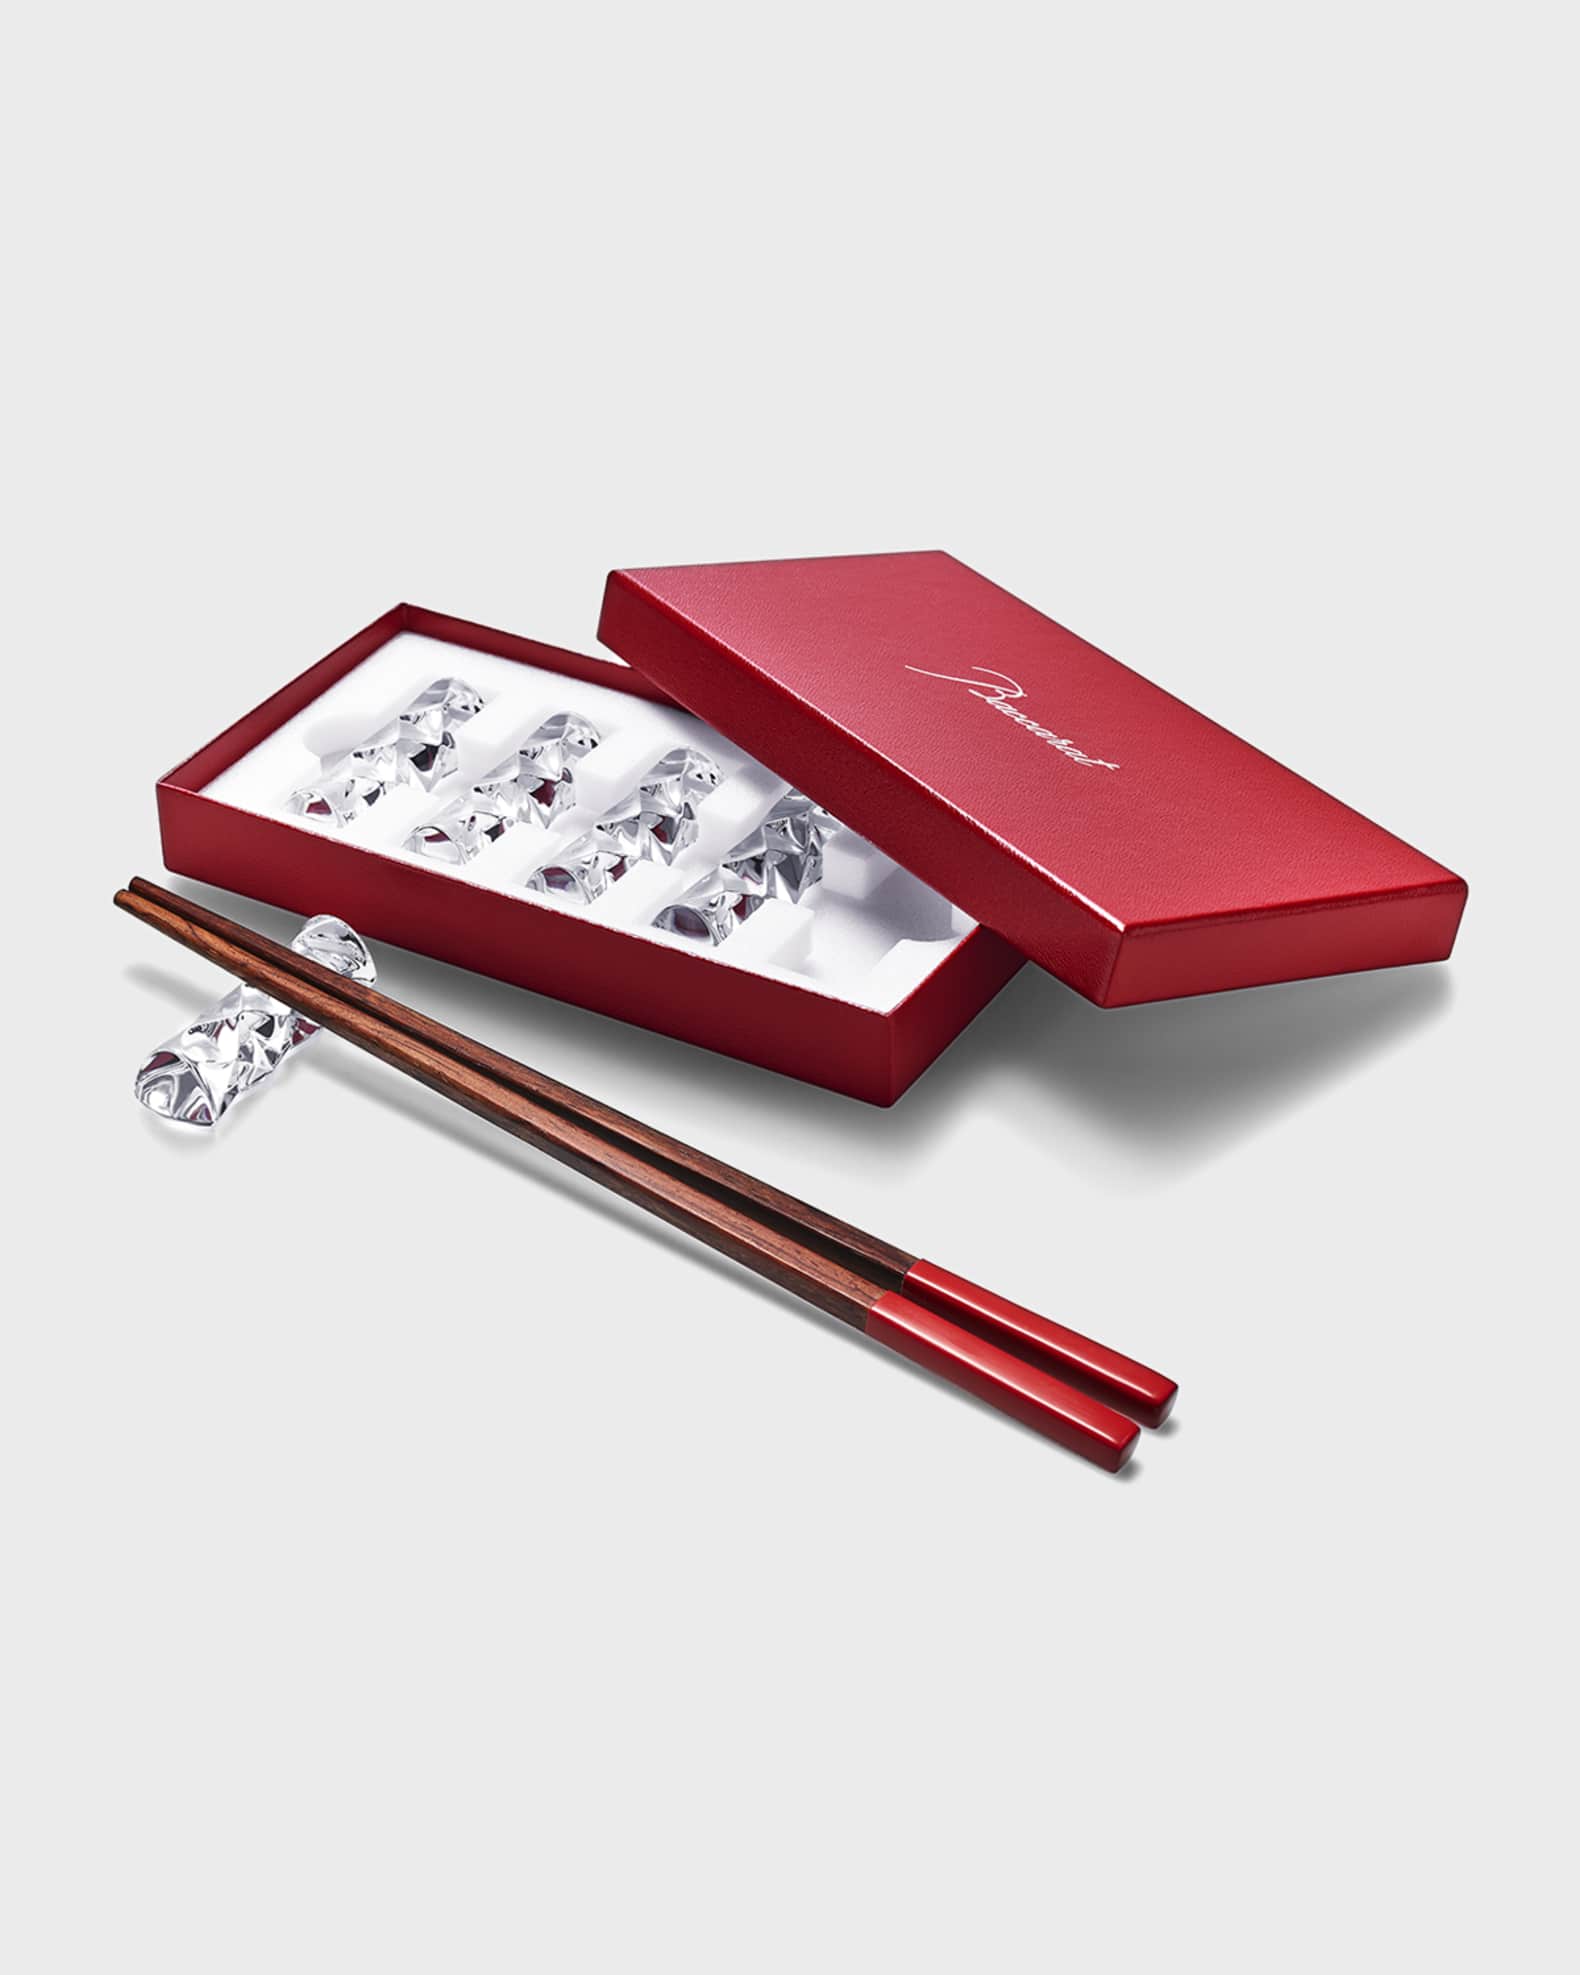 Louis Vuitton chopsticks: How much do they cost?